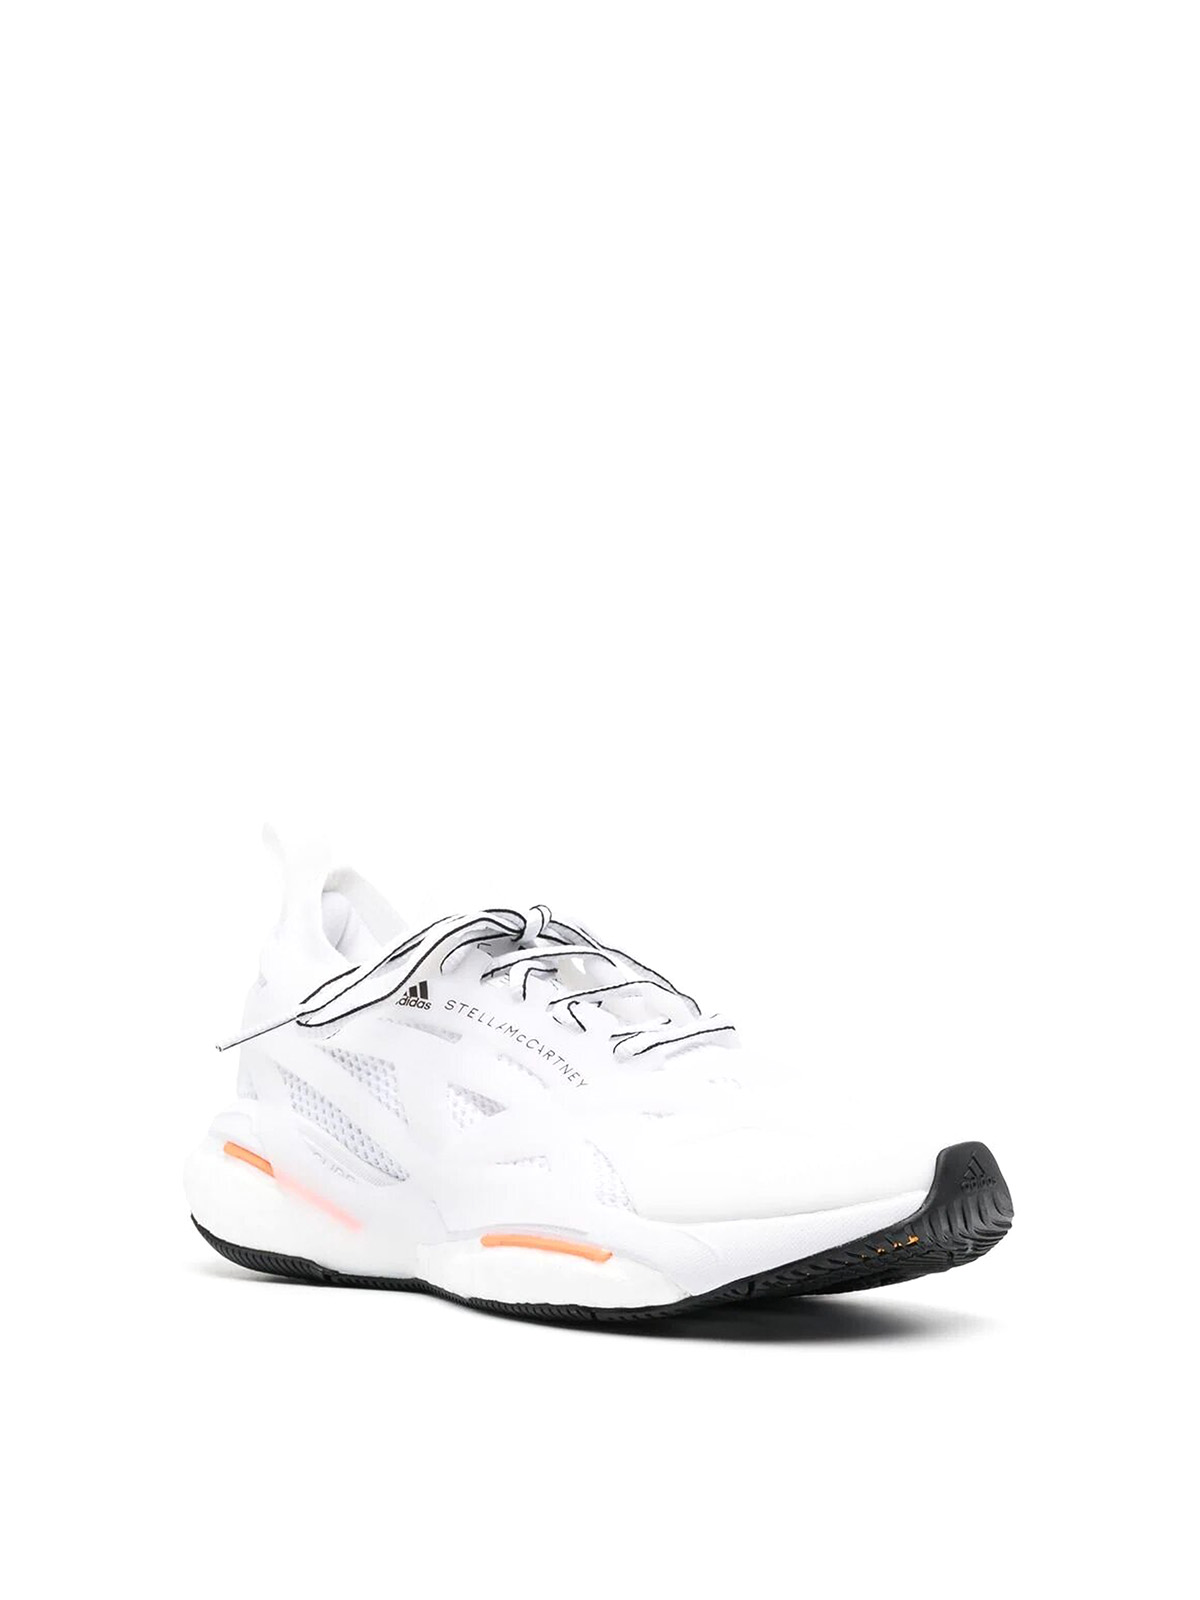 Trainers Adidas by Stella McCartney - Solarglide sneakers - GX9859